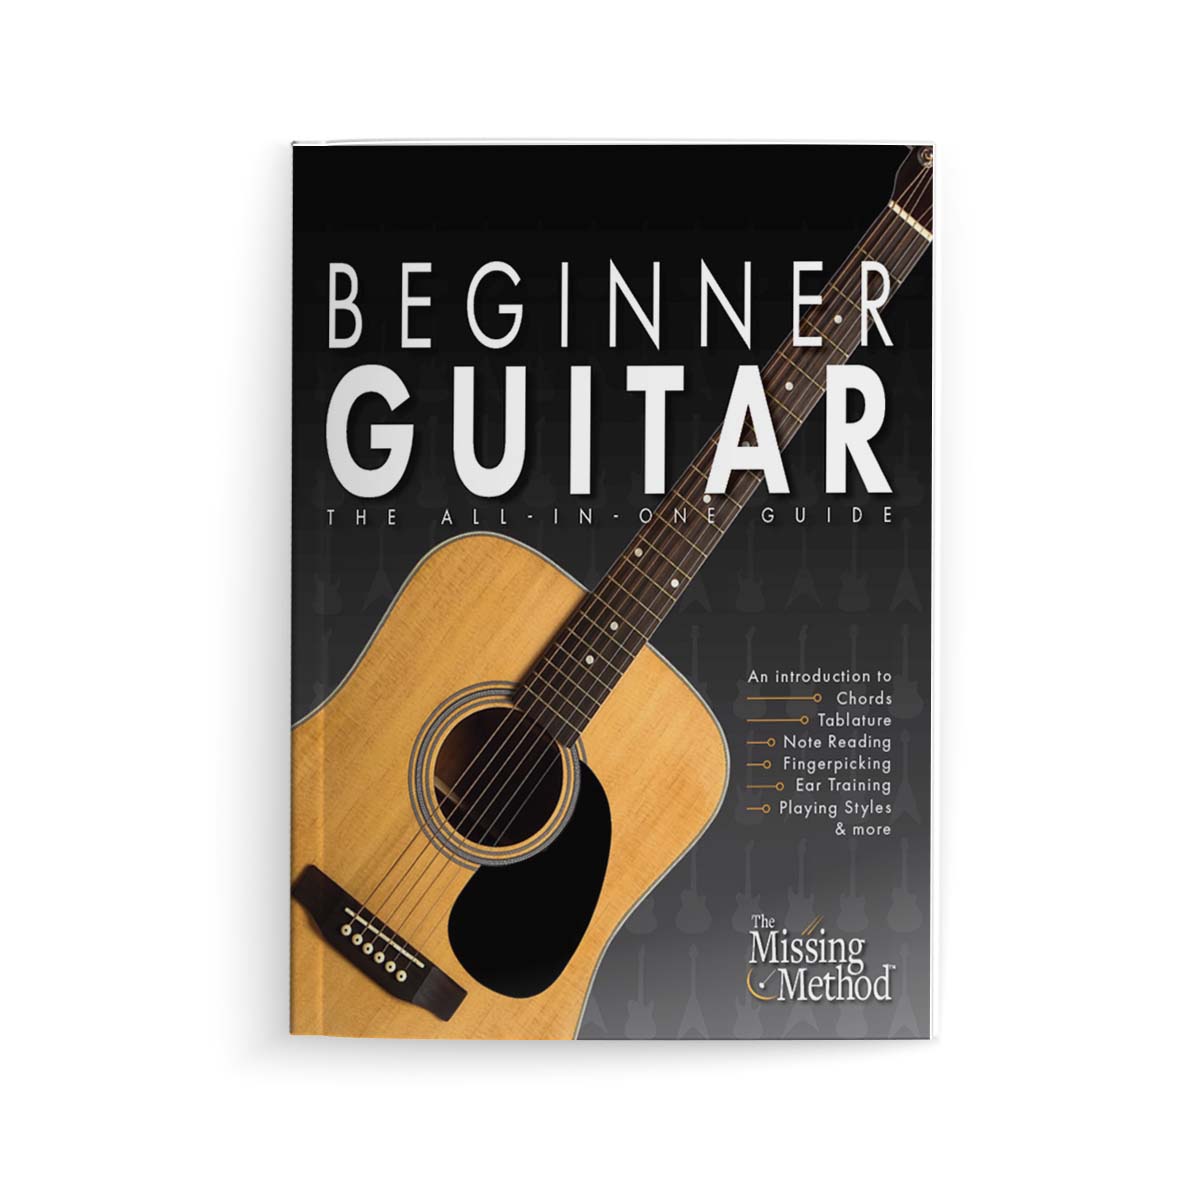 Beginner Guitar: The All-in-One Guide